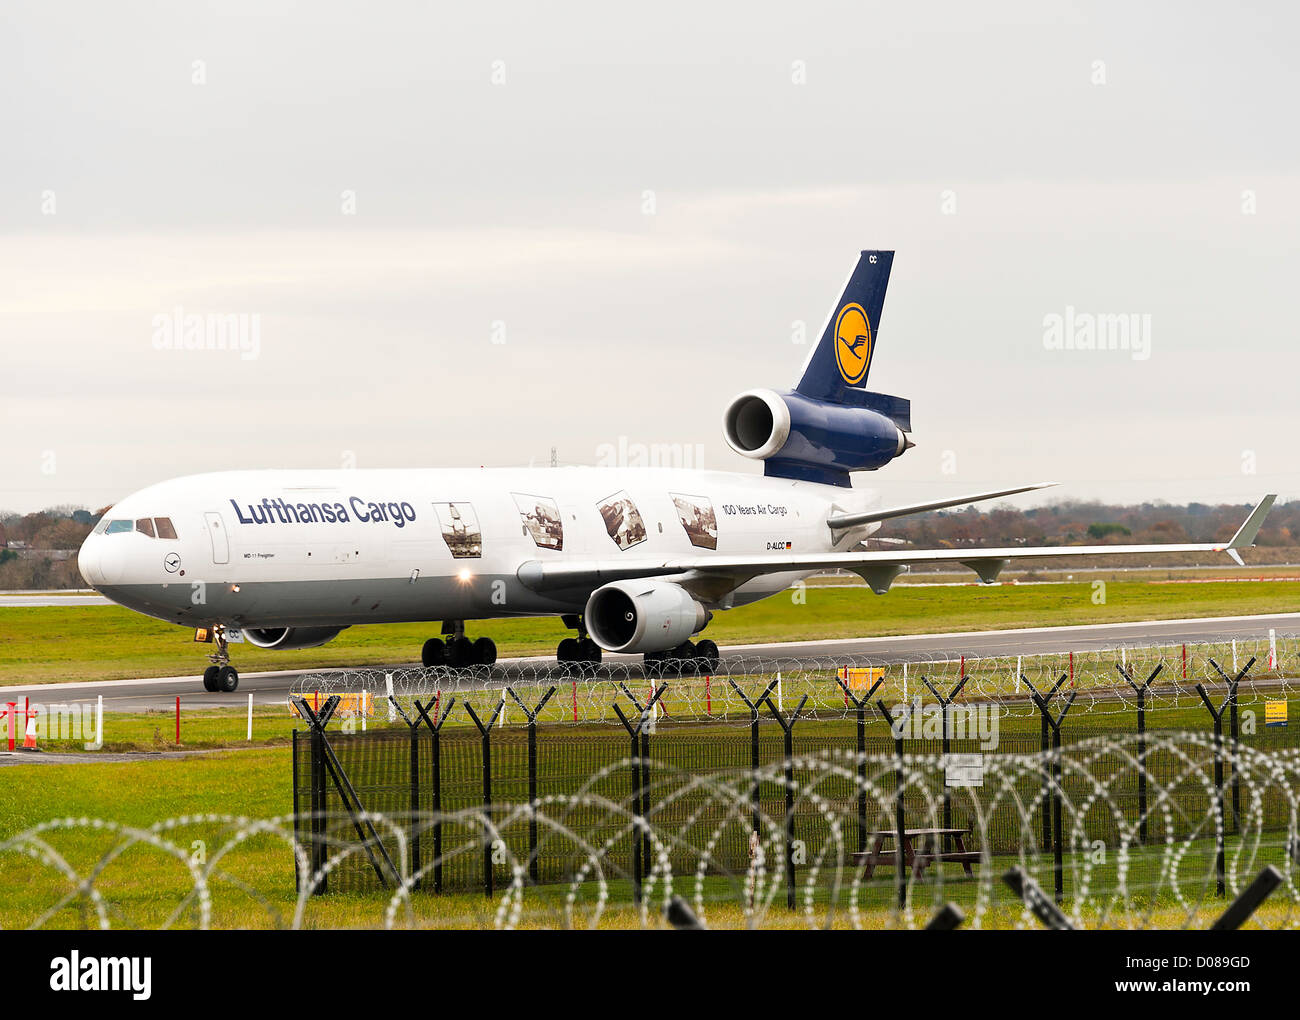 Lufthansa Cargo Airlines Mc Donnell Douglas MD-11F Freighter Airliner D-ALCC Taxiing at Manchester Airport England UK Stock Photo